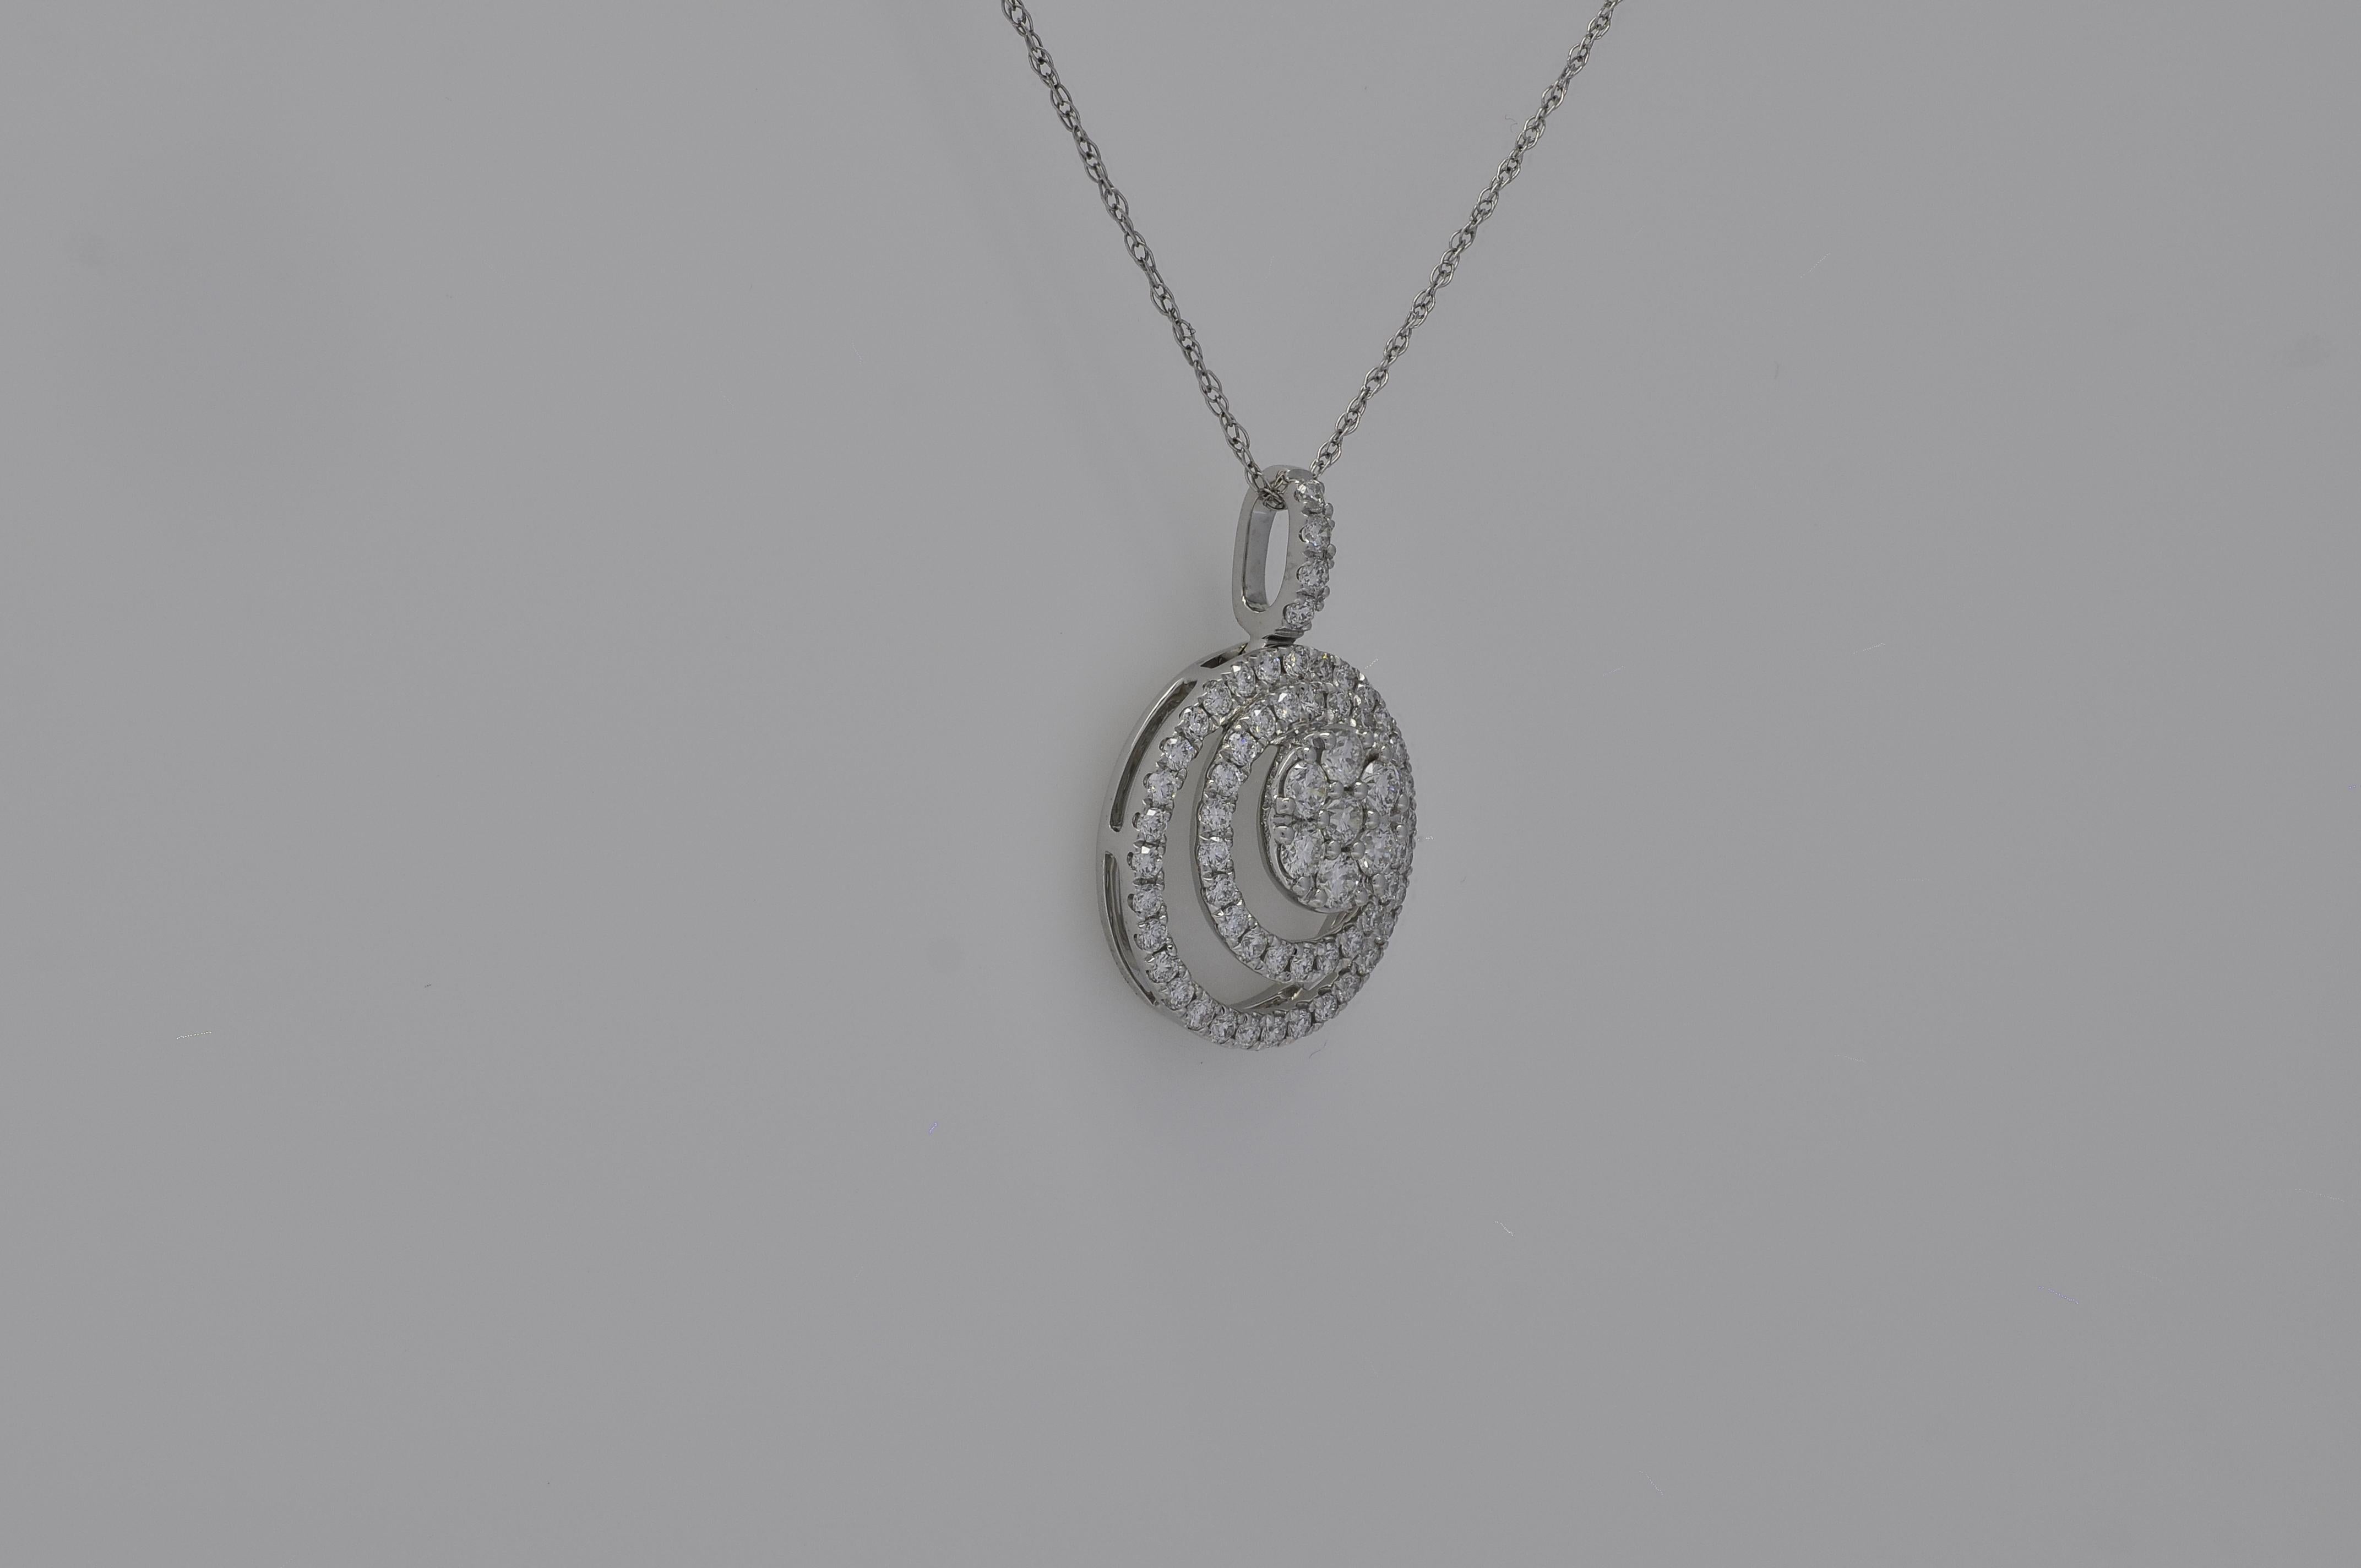 This pendant necklace is a true masterpiece of craftsmanship and elegance. It features a breathtaking cluster of round-shape diamonds, meticulously arranged to create a sweet and sparkling focal point. The diamond cluster is further enhanced by a